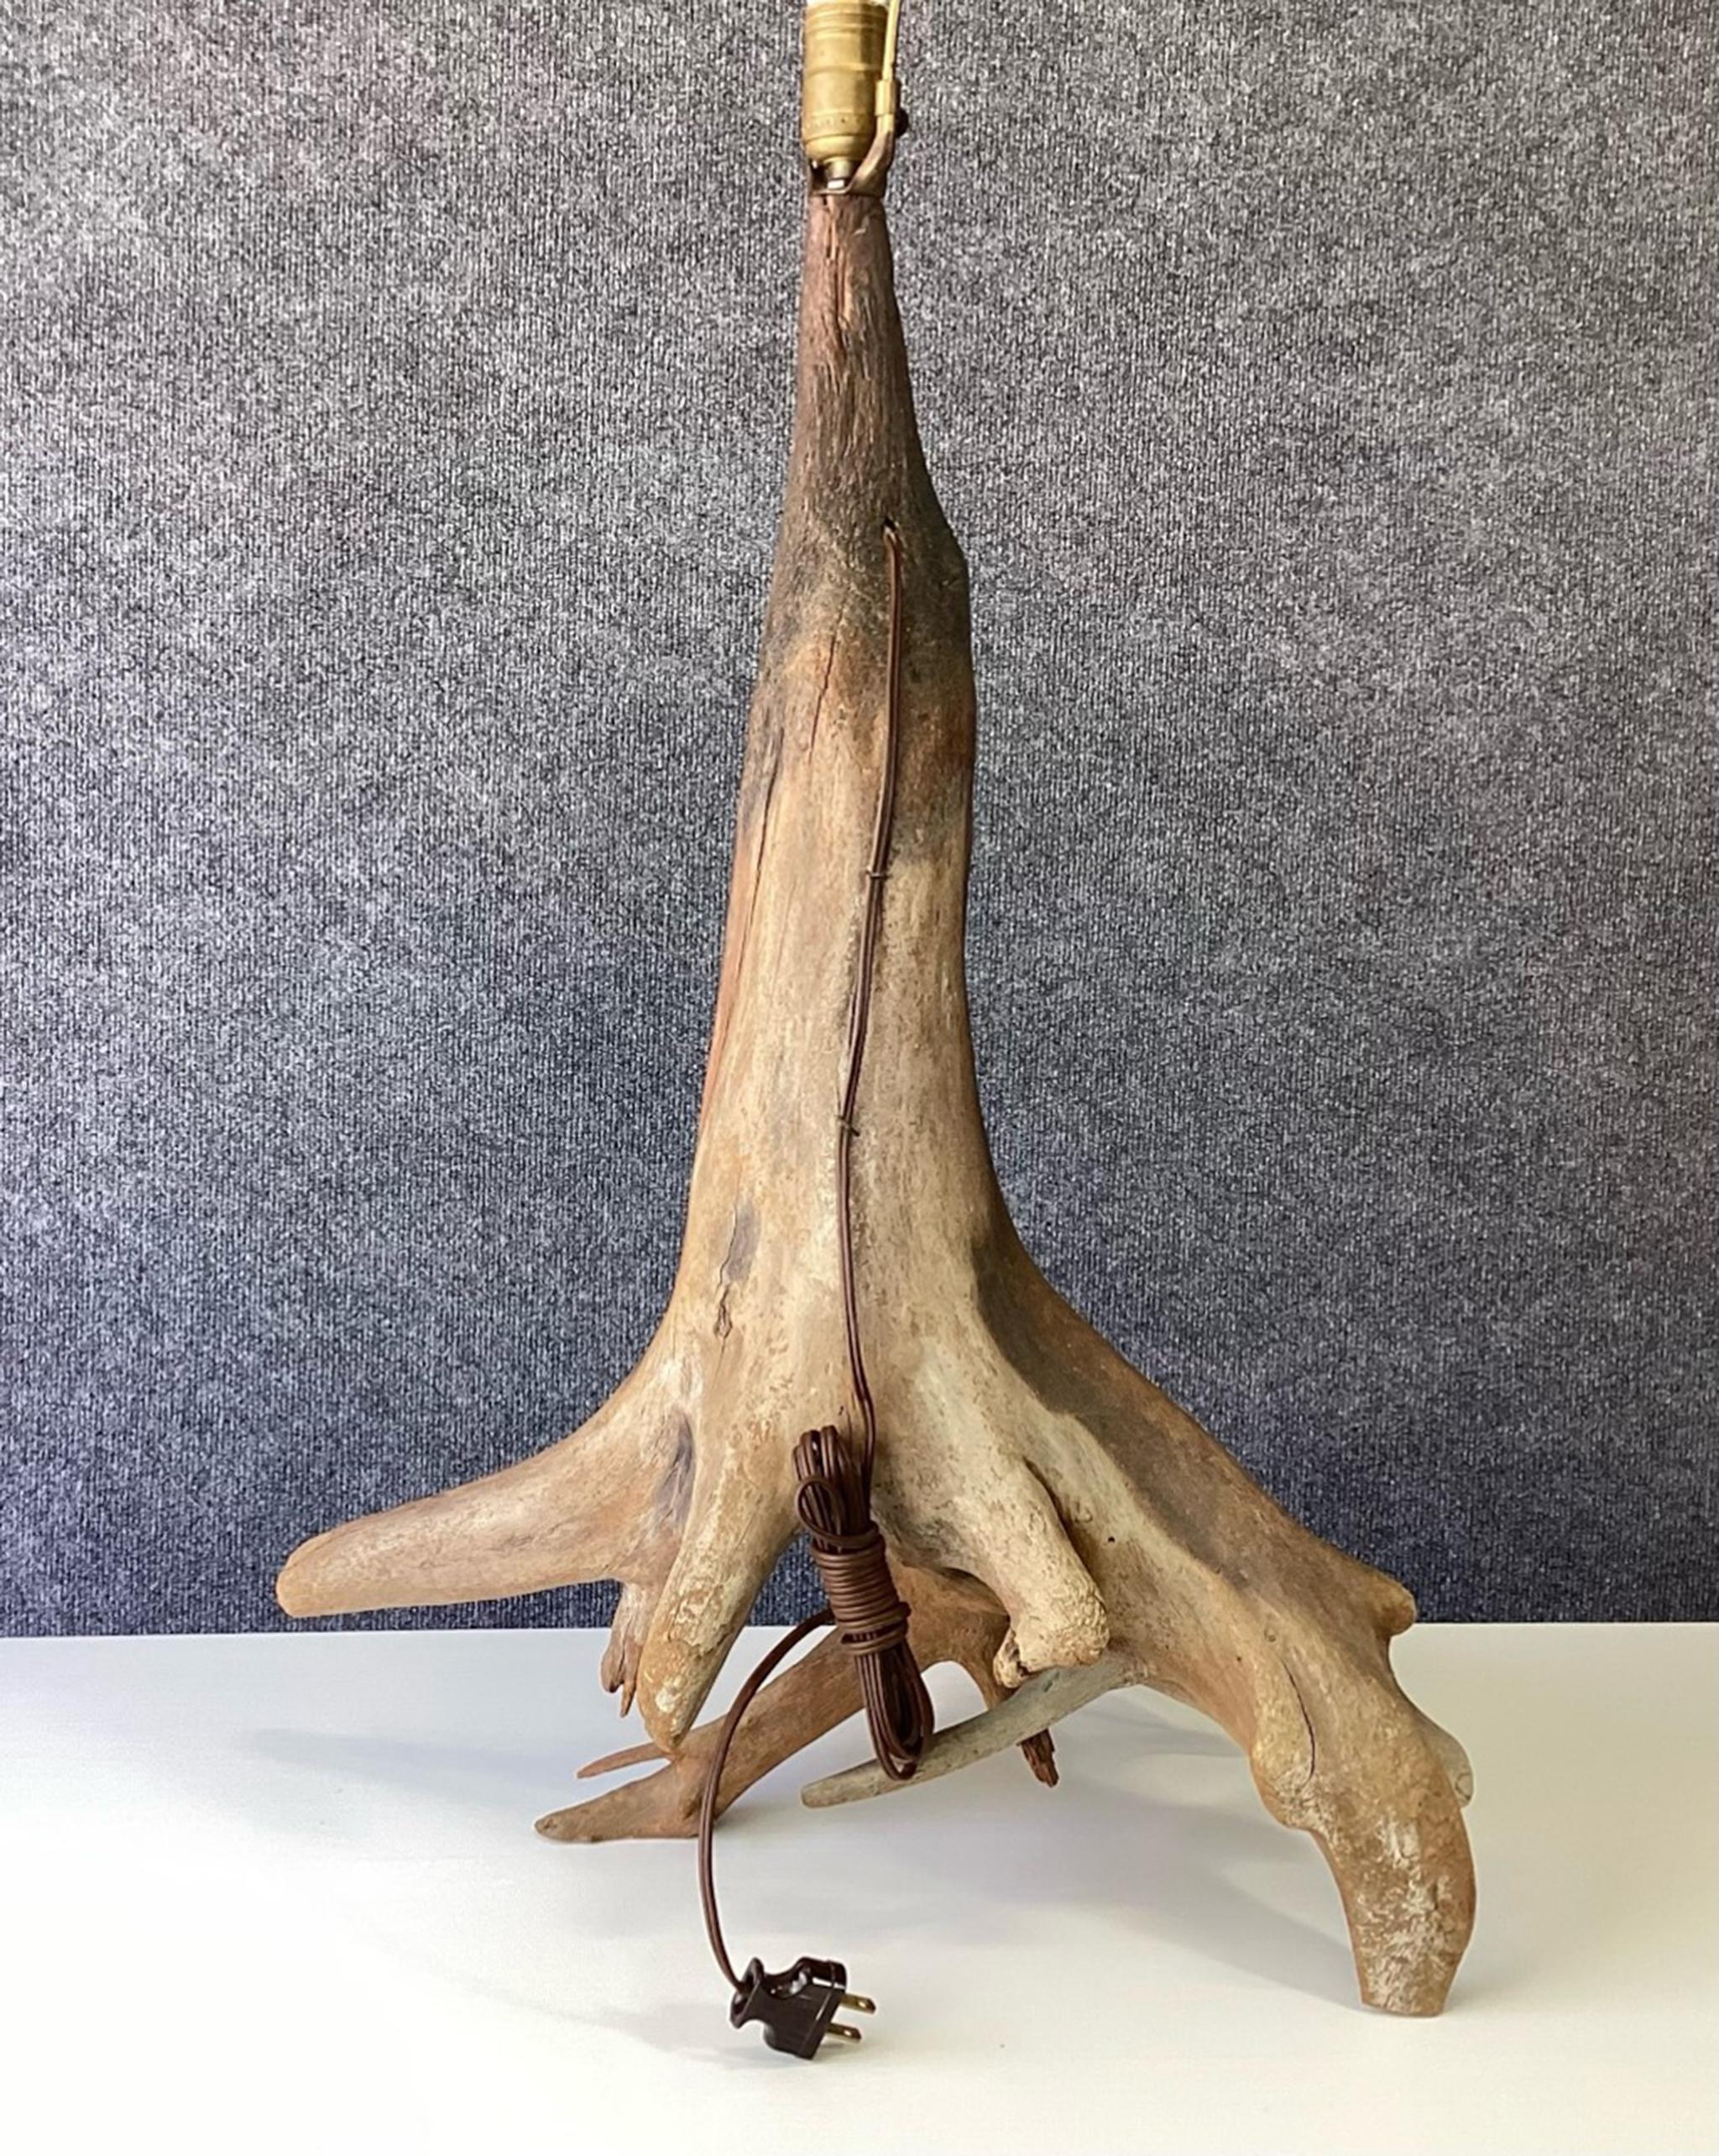 Unique Vintage & Large Driftwood or Root Wood Large Table Lamp Mid-Century Mod In Good Condition For Sale In Philadelphia, PA